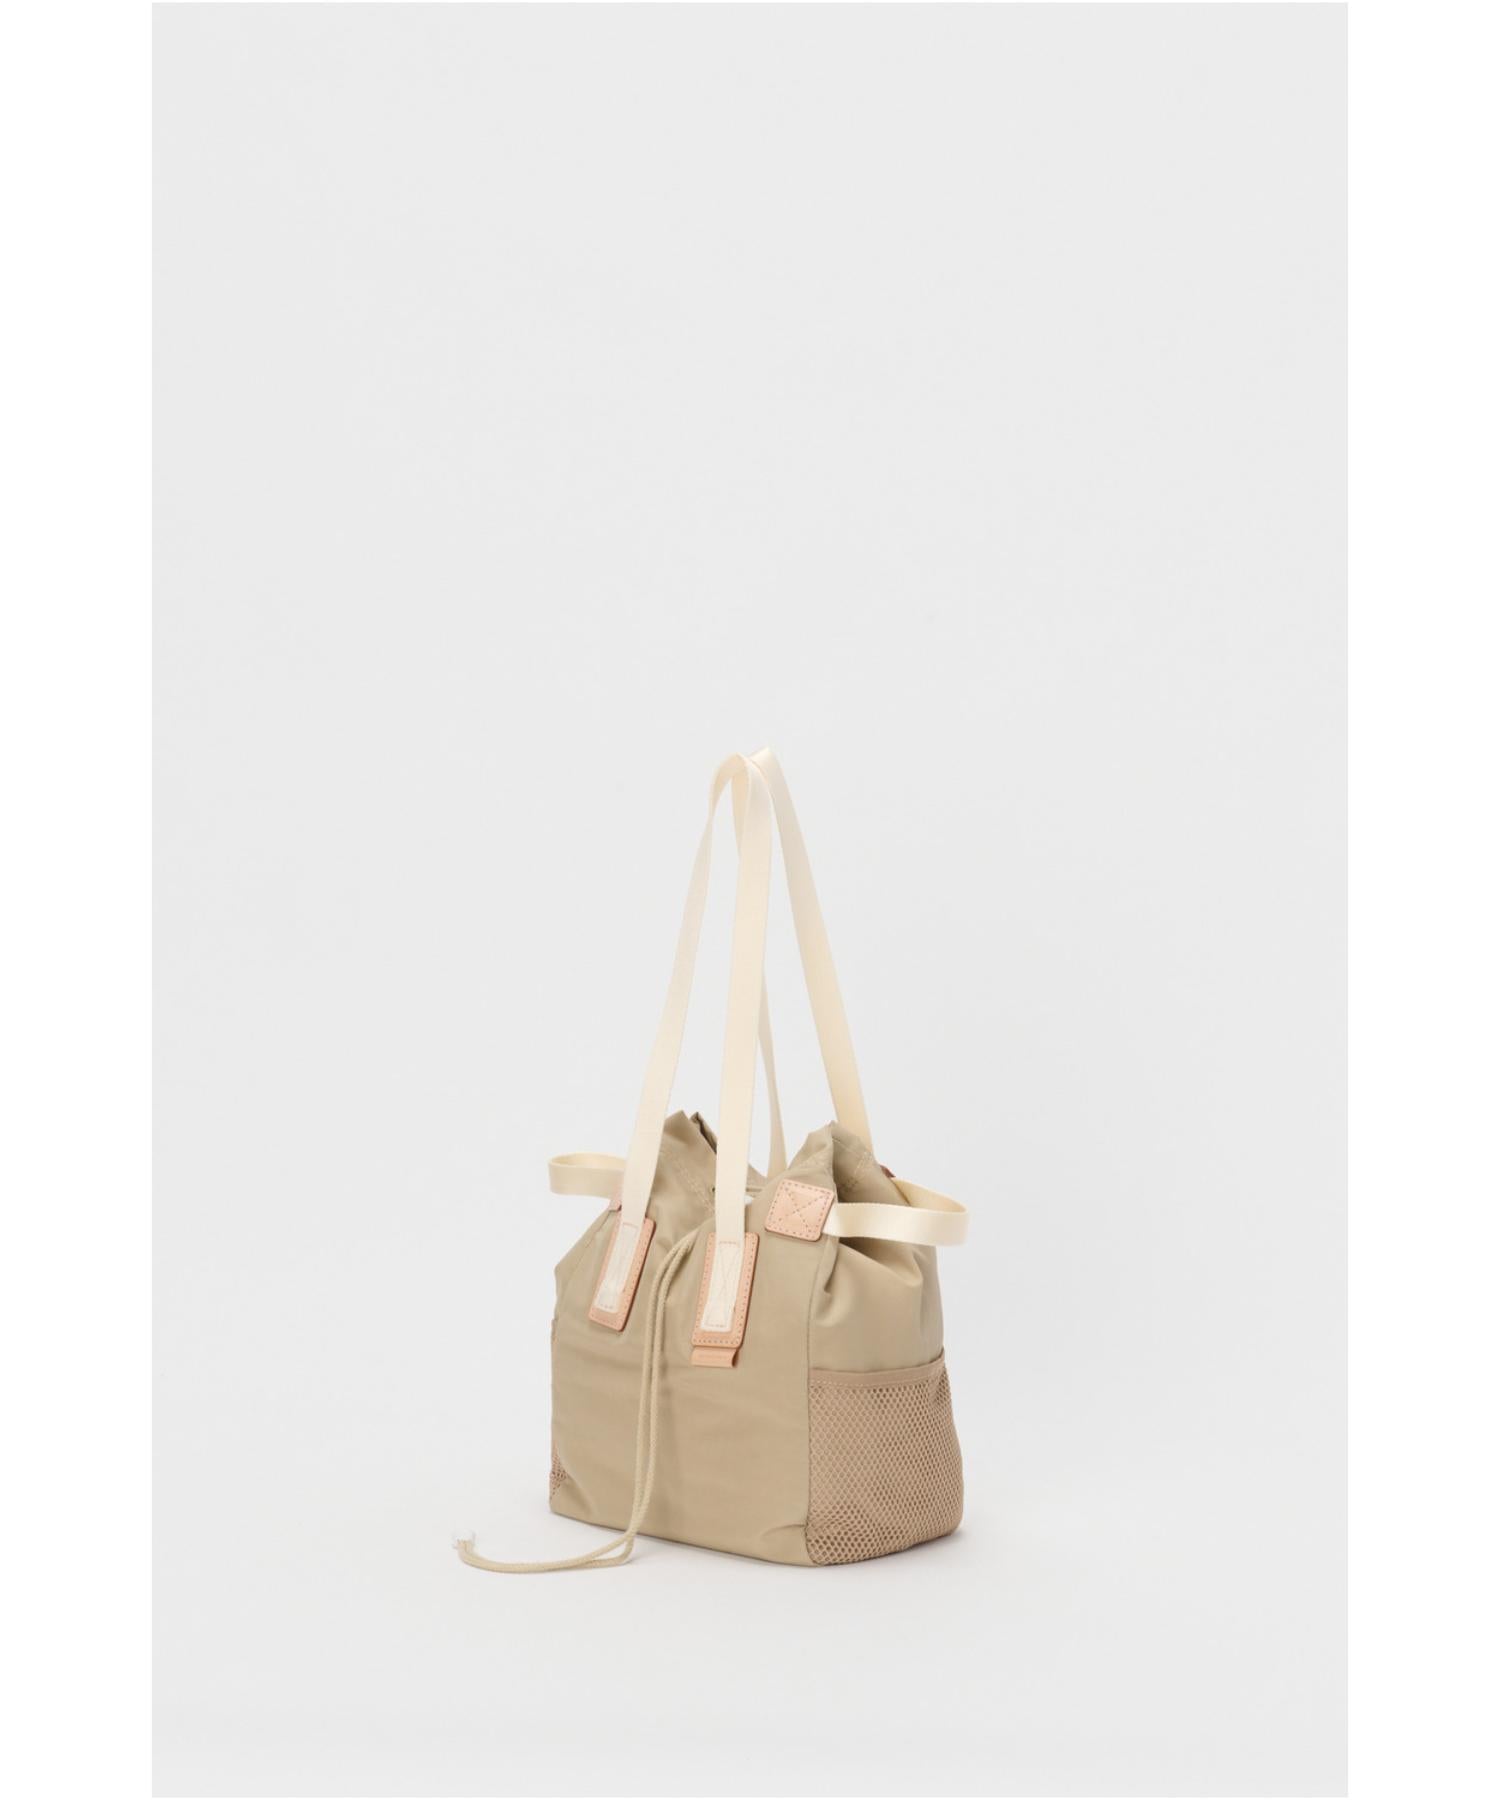 functional tote bag small - Hender Scheme (エンダースキーマ) - bag